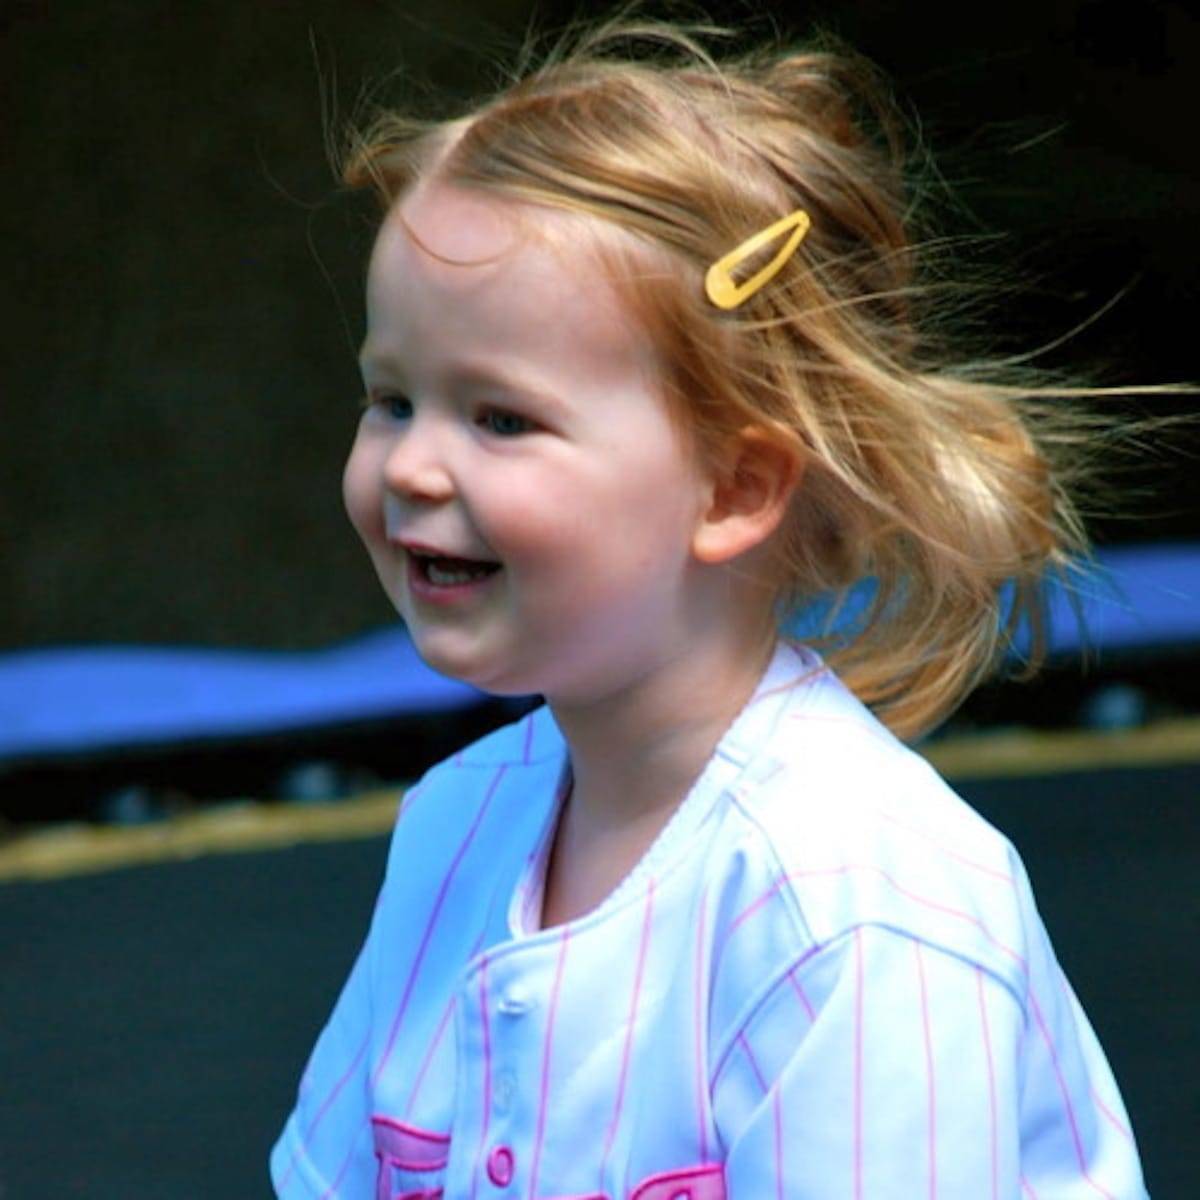 Little girl smiling with a yellow clip in her hair.